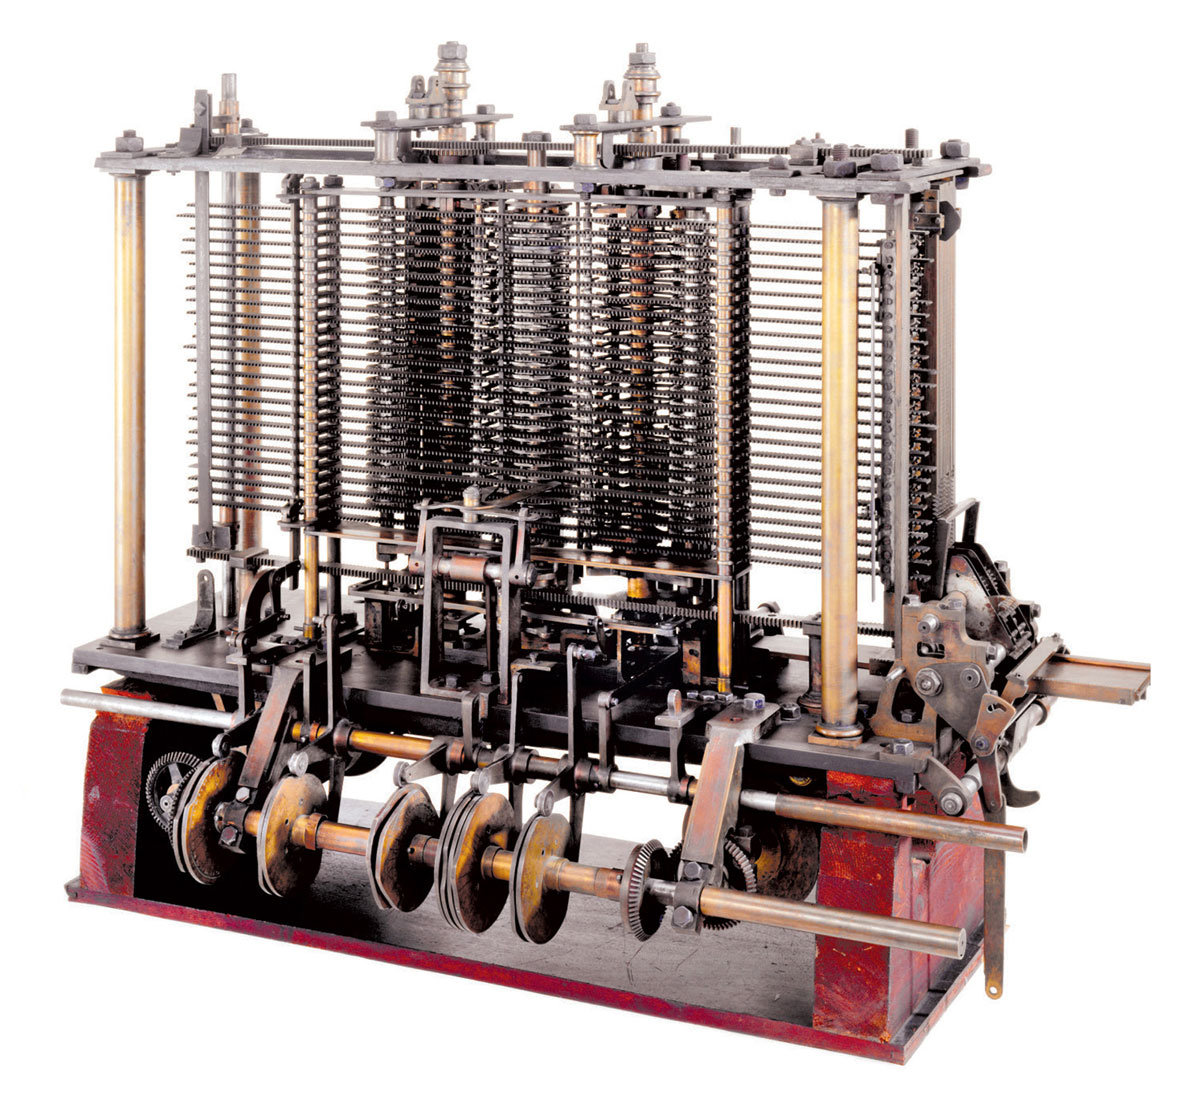 Babbage’s Analytical Engine, 1834–1871, the first fully automatic calculating machine. Courtesy Science Museum / Science and Society Picture Library, London.